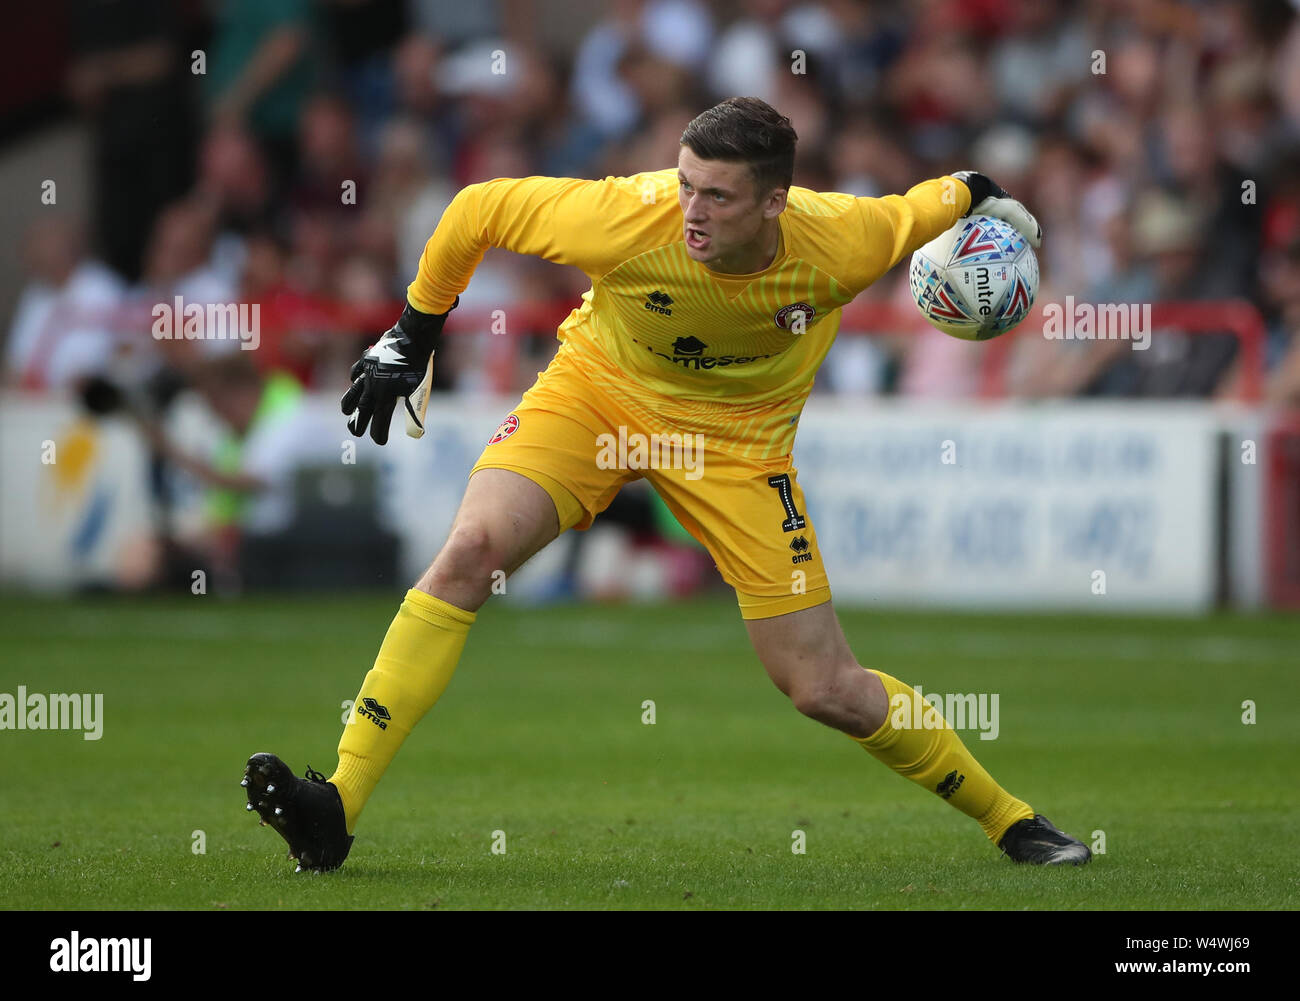 Walsall goalkeeper Liam Roberts during the pre-season friendly match at the Banks's Stadium, Walsall. PRESS ASSOCIATION Photo. Picture date: Wednesday July 24, 2019. See PA story SOCCER Walsall. Photo credit should read: Nick Potts/PA Wire. RESTRICTIONS: No use with unauthorised audio, video, data, fixture lists, club/league logos or 'live' services. Online in-match use limited to 120 images, no video emulation. No use in betting, games or single club/league/player publications. Stock Photo